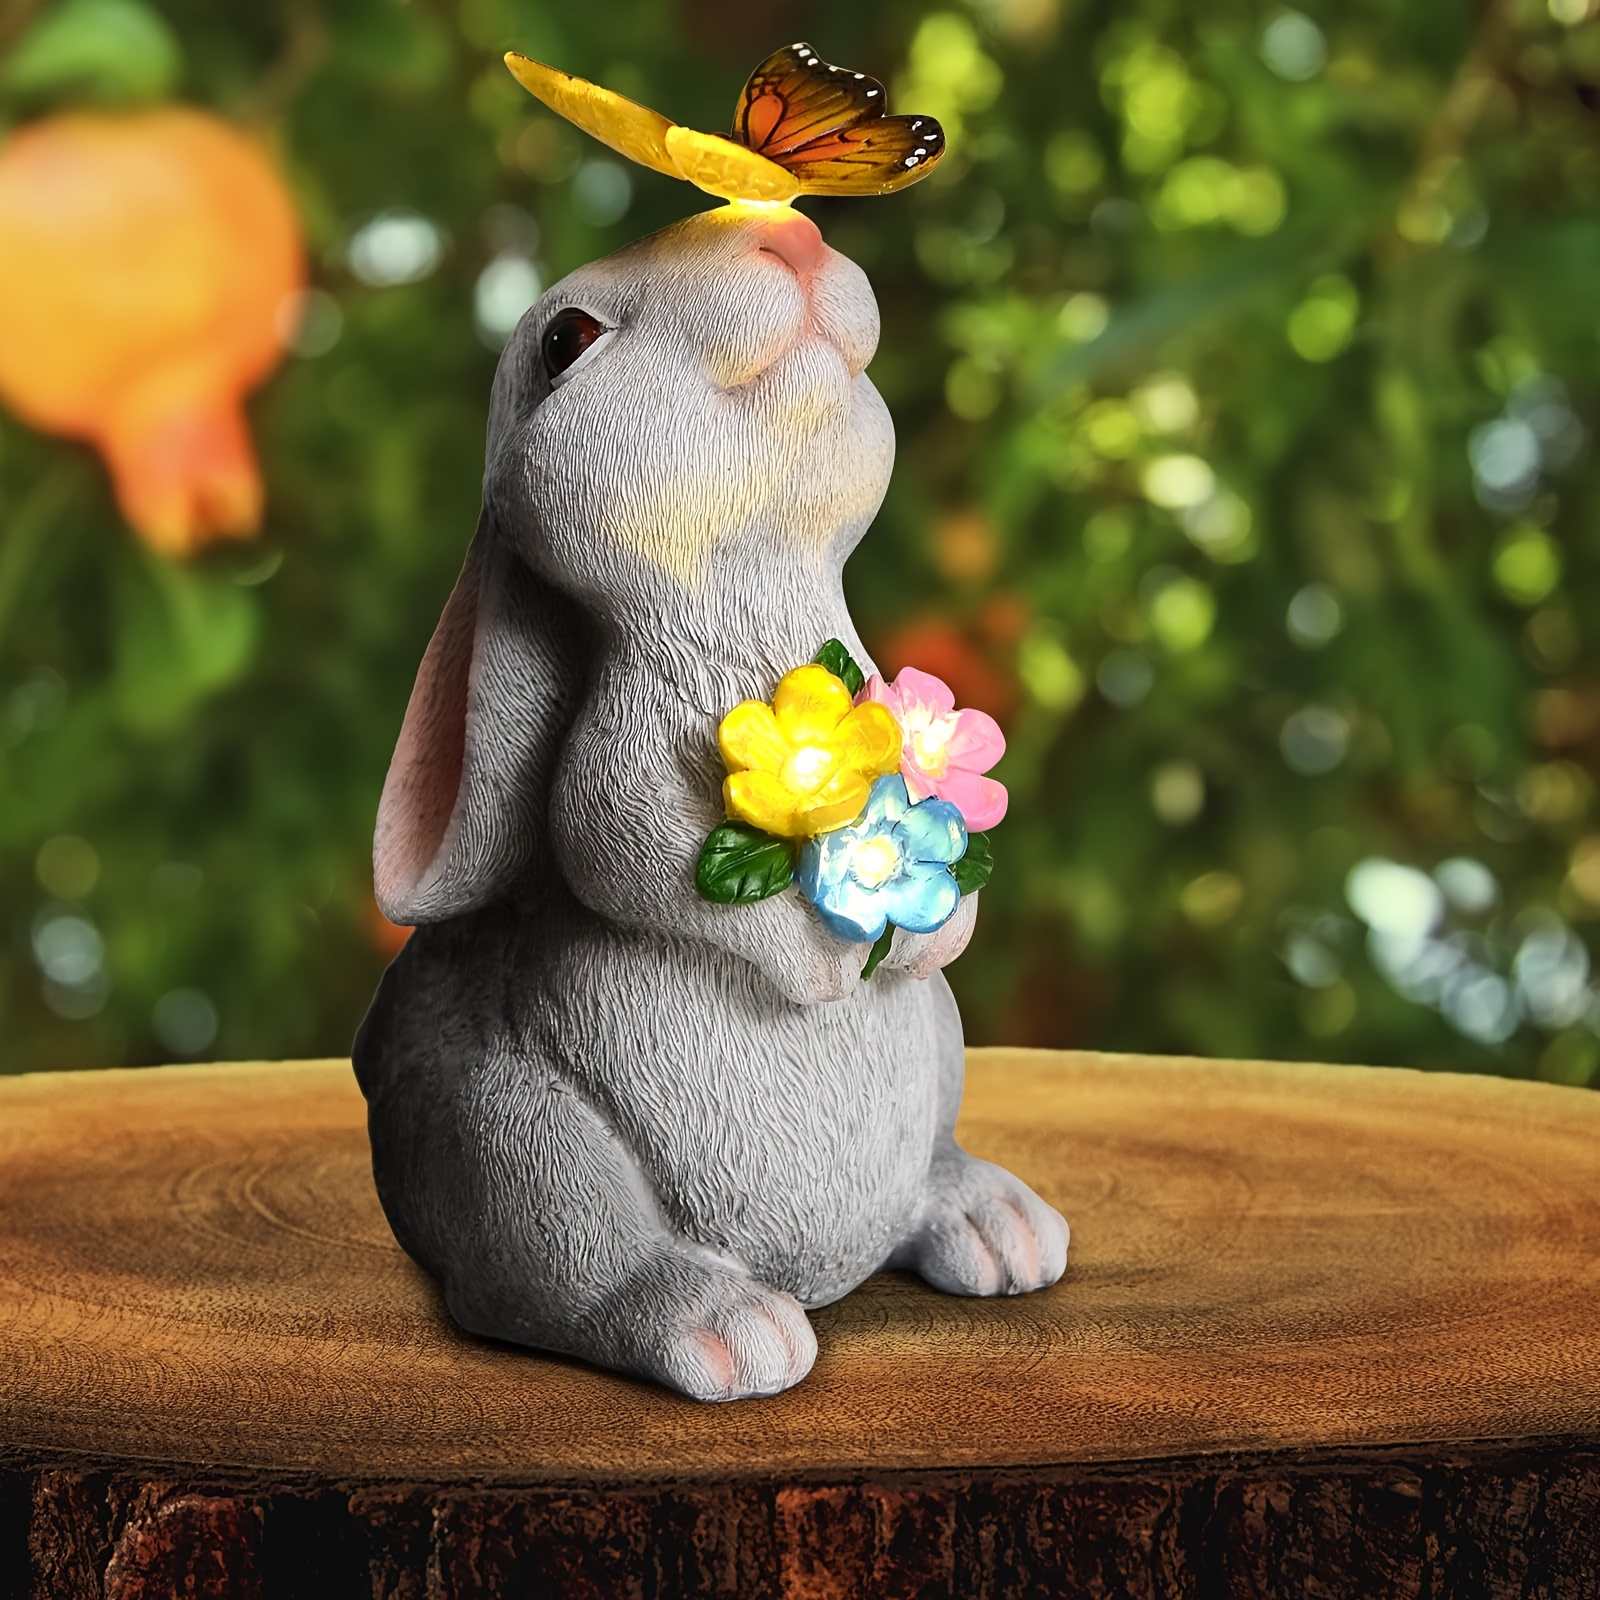 

Outdoor Rabbit Statue Decoration With Solar-powered Butterfly Light, Resin Art Deco Rabbit Figurine For Garden, Lawn, Patio, Yard Decor - Nature And Outdoors Theme, Mother's Day Gift, Floor Mount